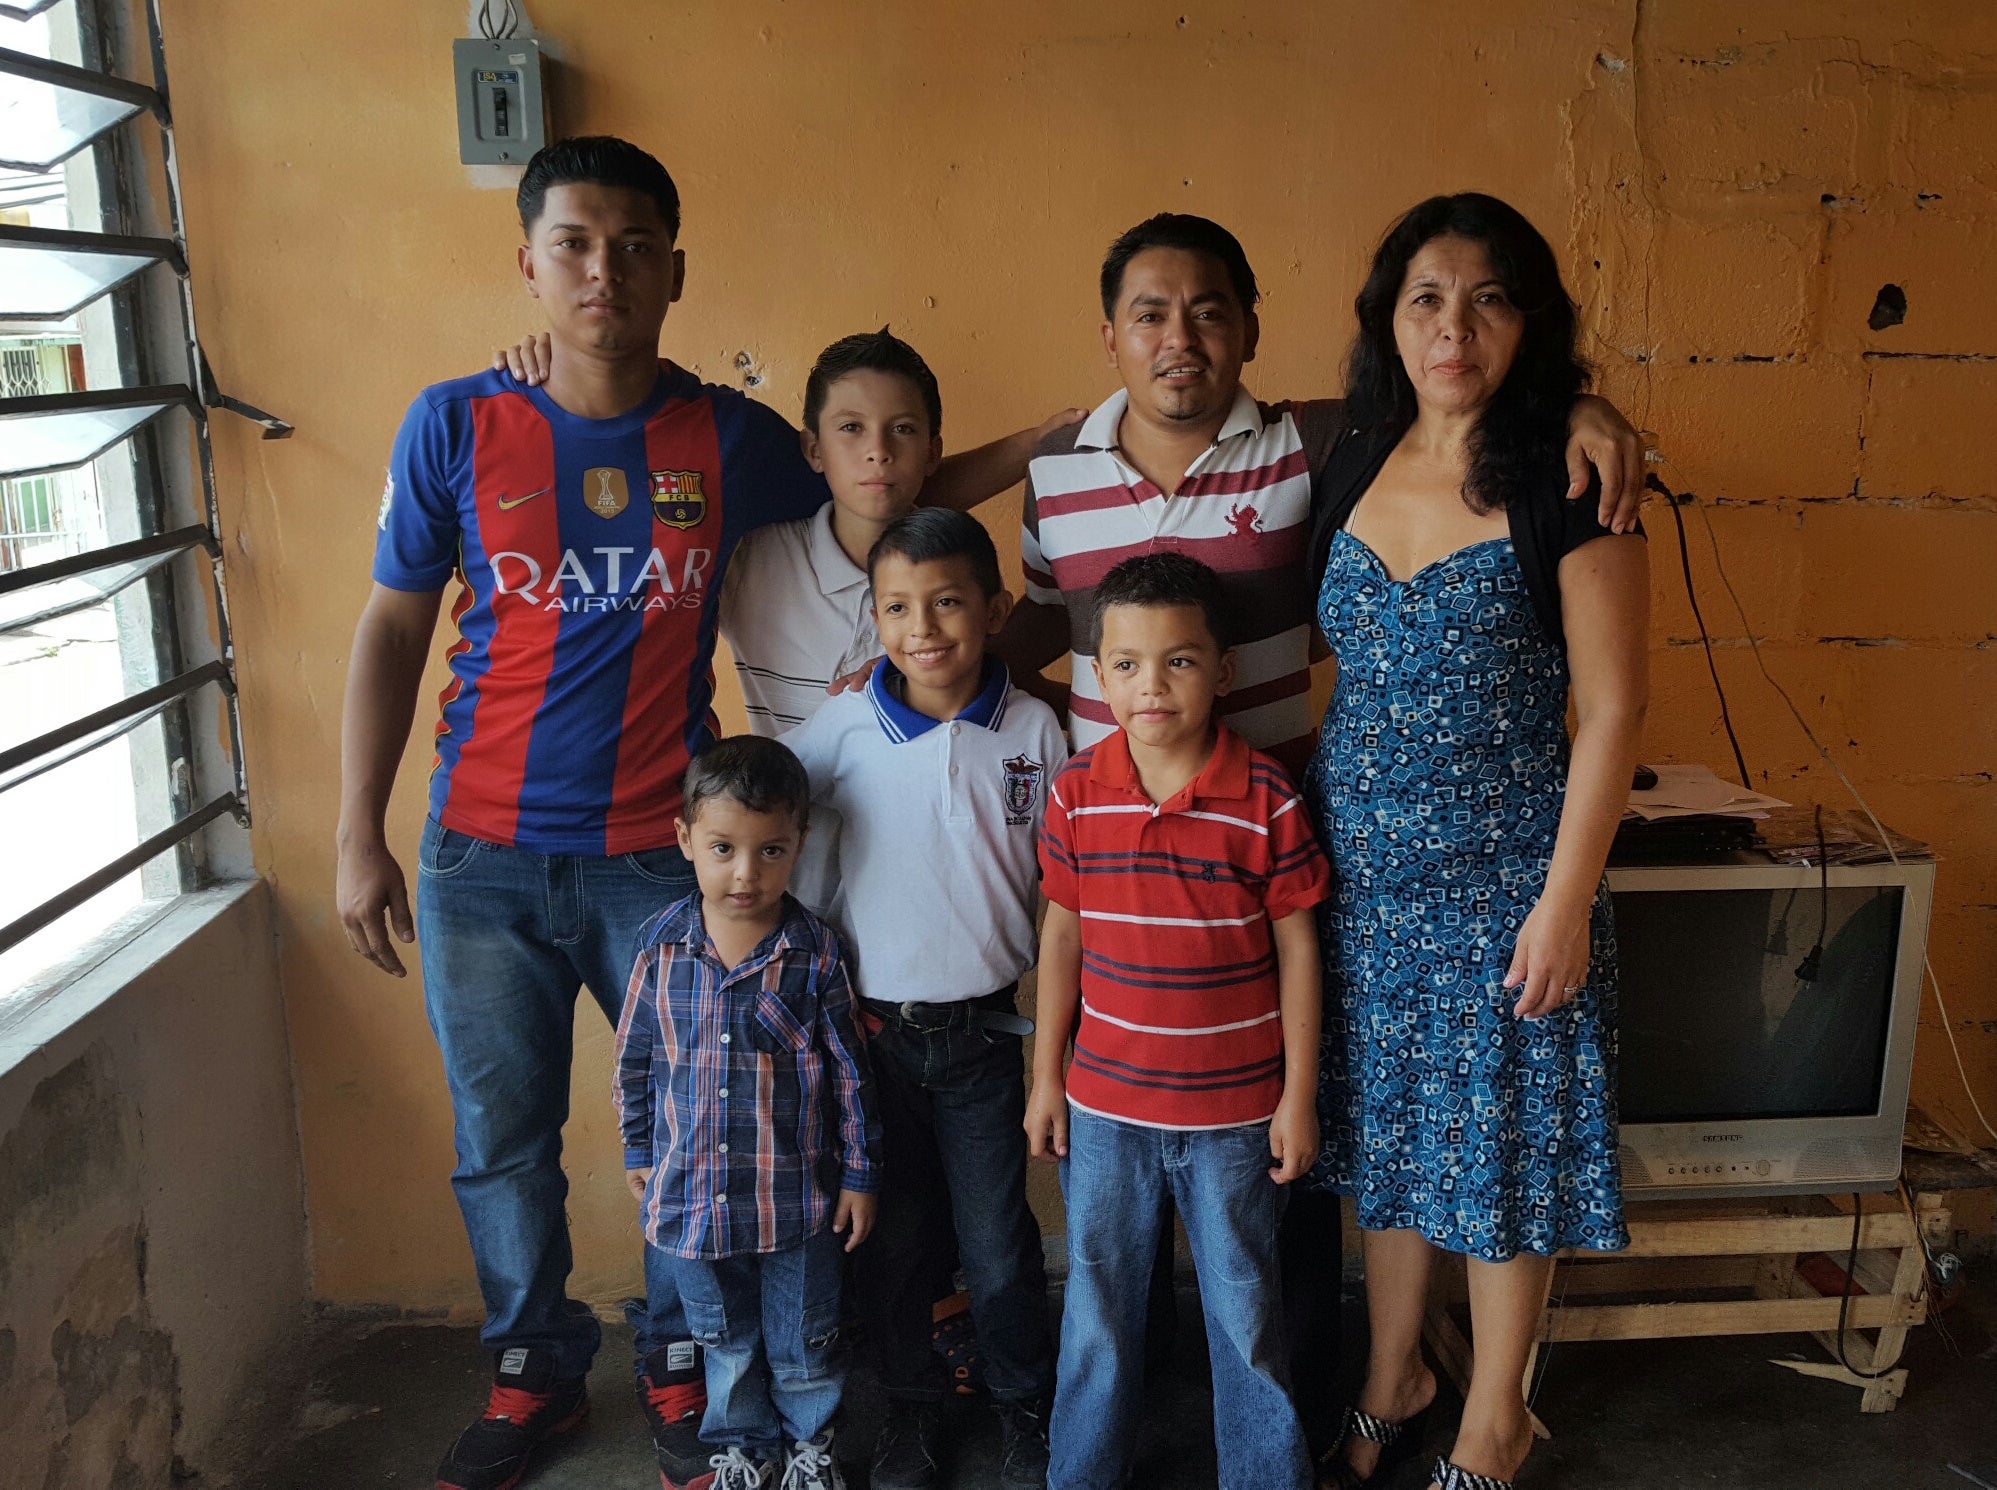 Rafael, second from far right, fled Honduras with his five children to seek refuge in Mexico